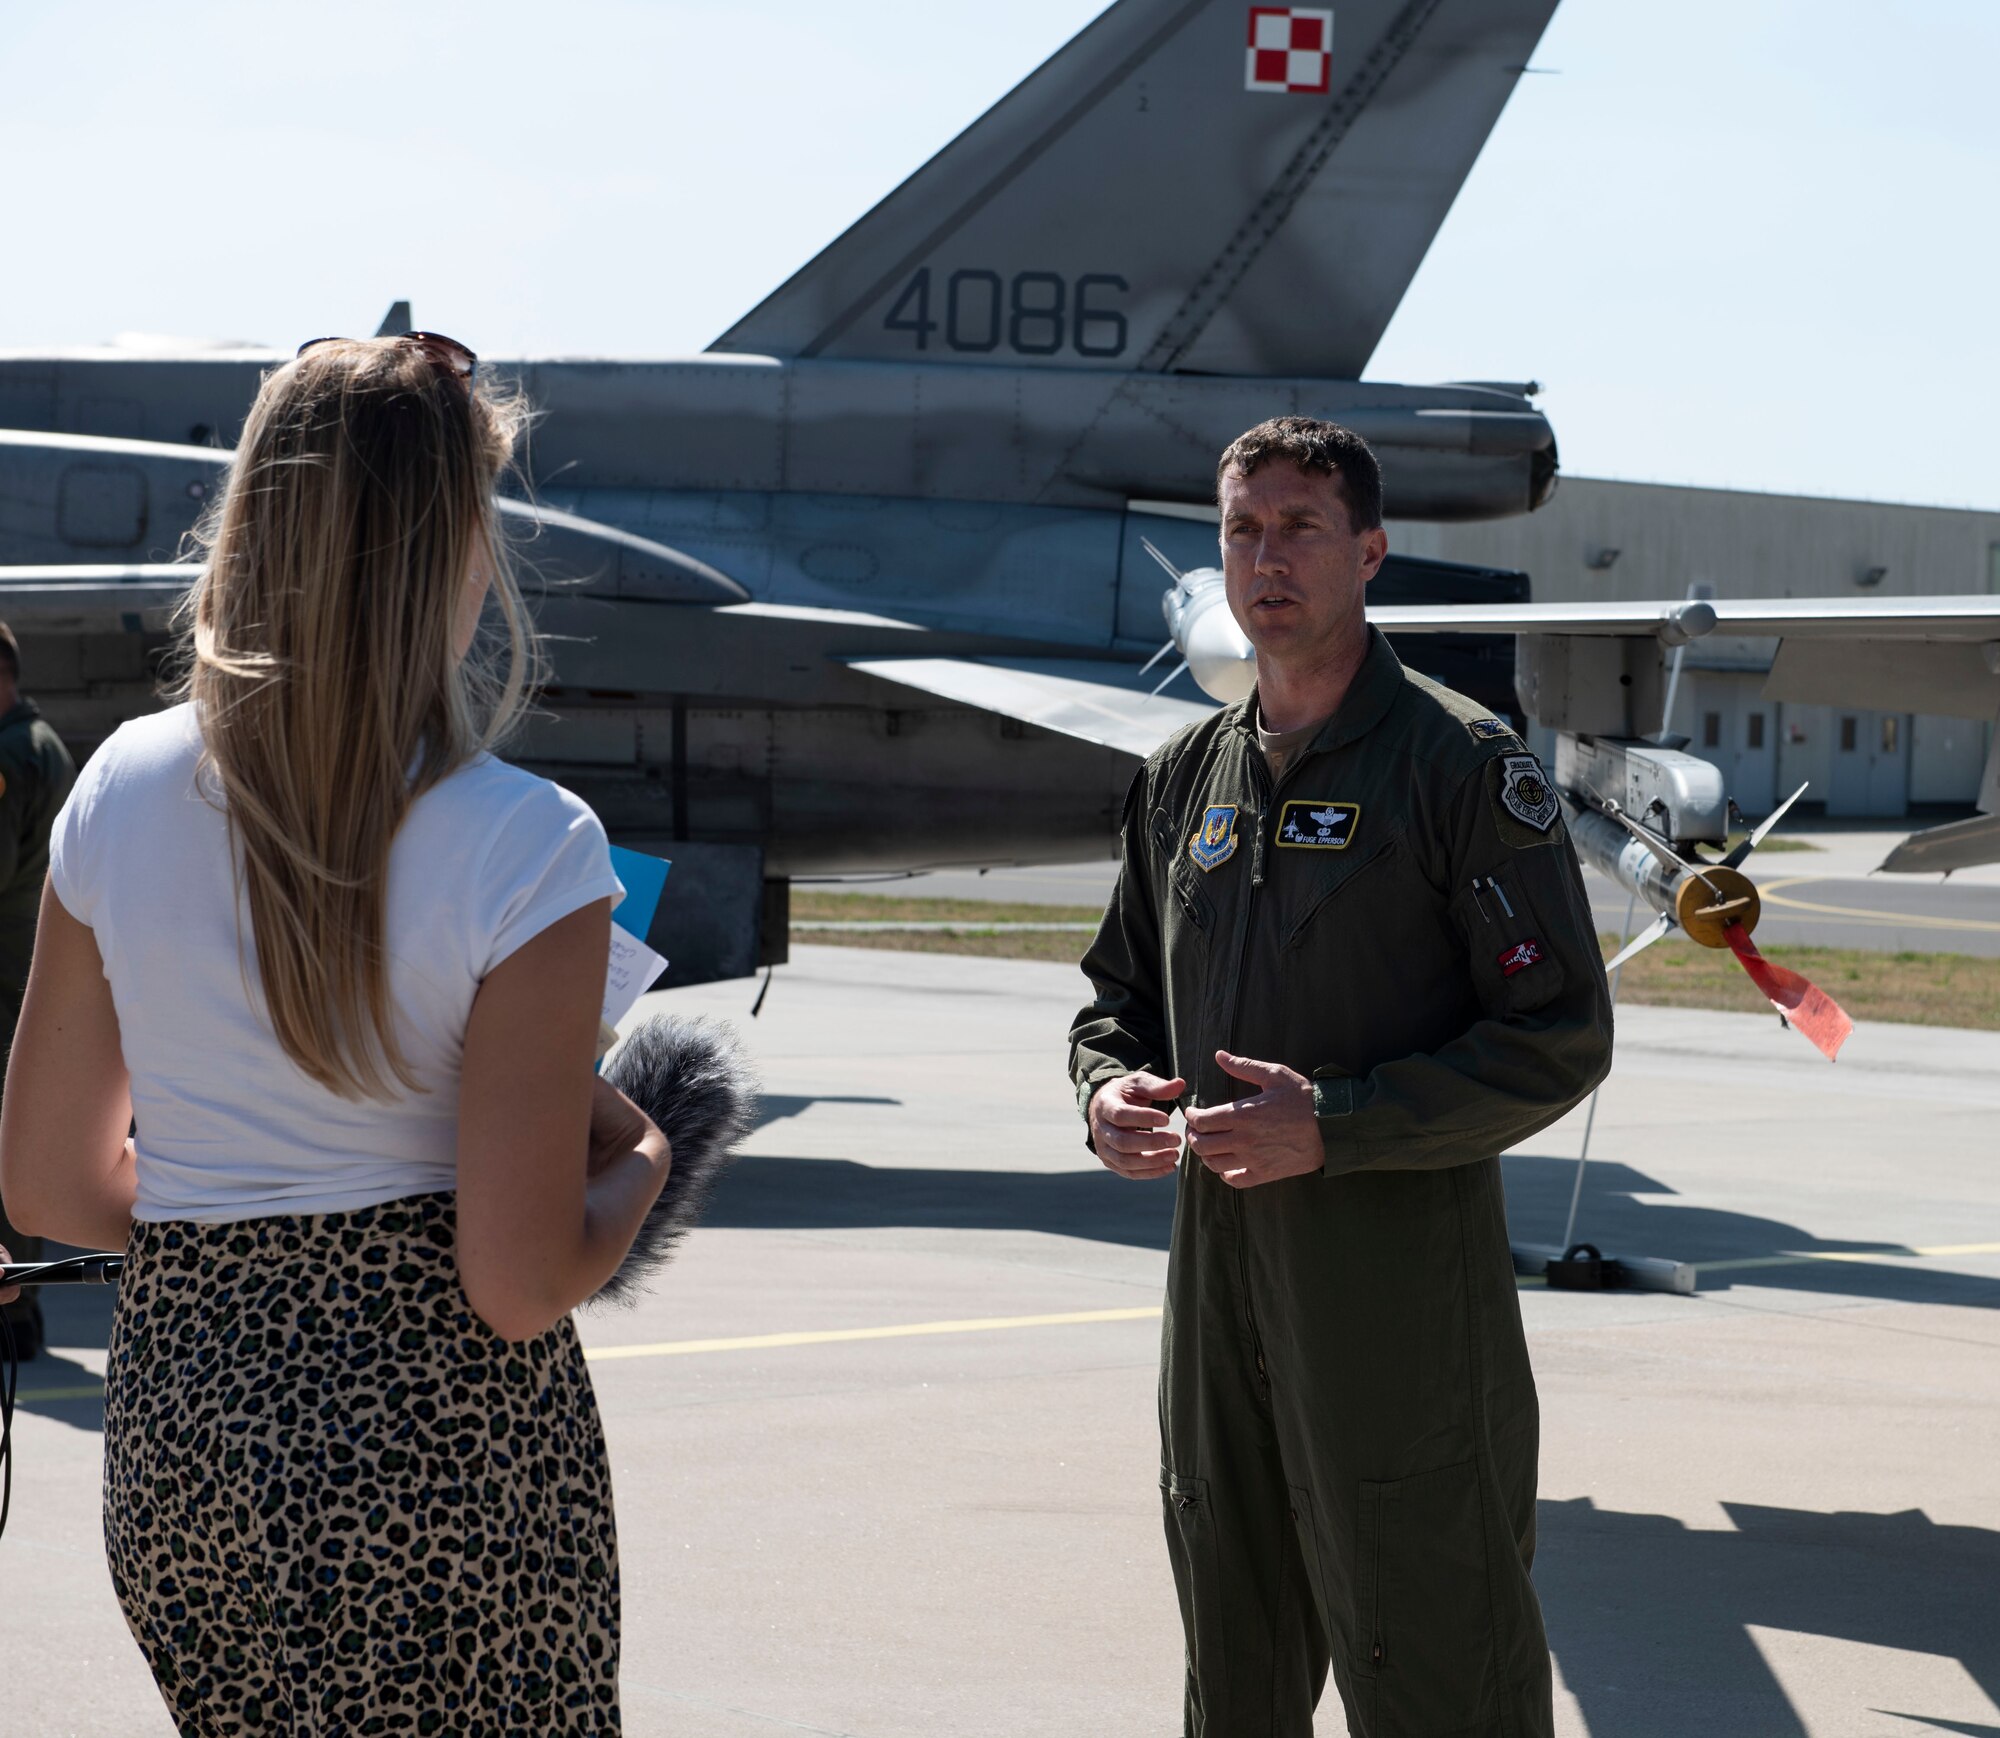 U.S. Air Force Col. David Epperson, 52nd Fighter Wing commander, receives an interview by Polish media at Łask AB, Poland, August 21, 2020. Epperson discussed the purpose of Aviation Detachment Rotation 20.4 and the importance of the partnership and friendship between the United States and Polish Allies. (U.S. Air Force photo by Senior Airman Melody W. Howley)